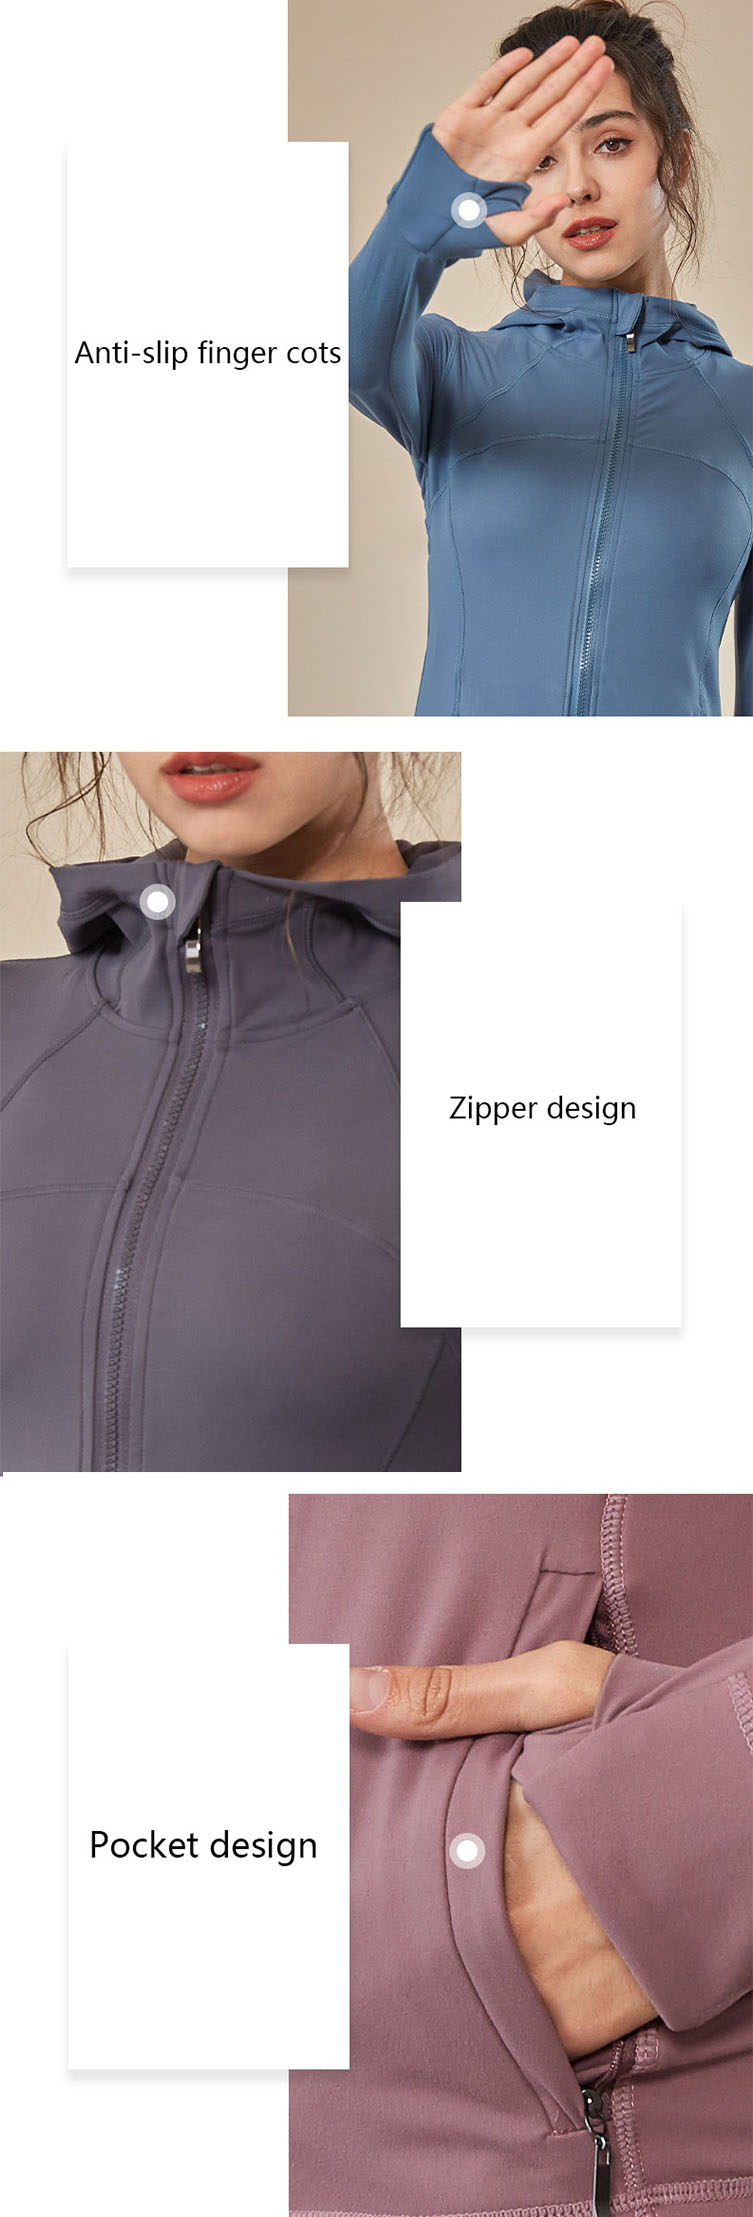 Zipper design is used to prevent skin scratches during exercise.